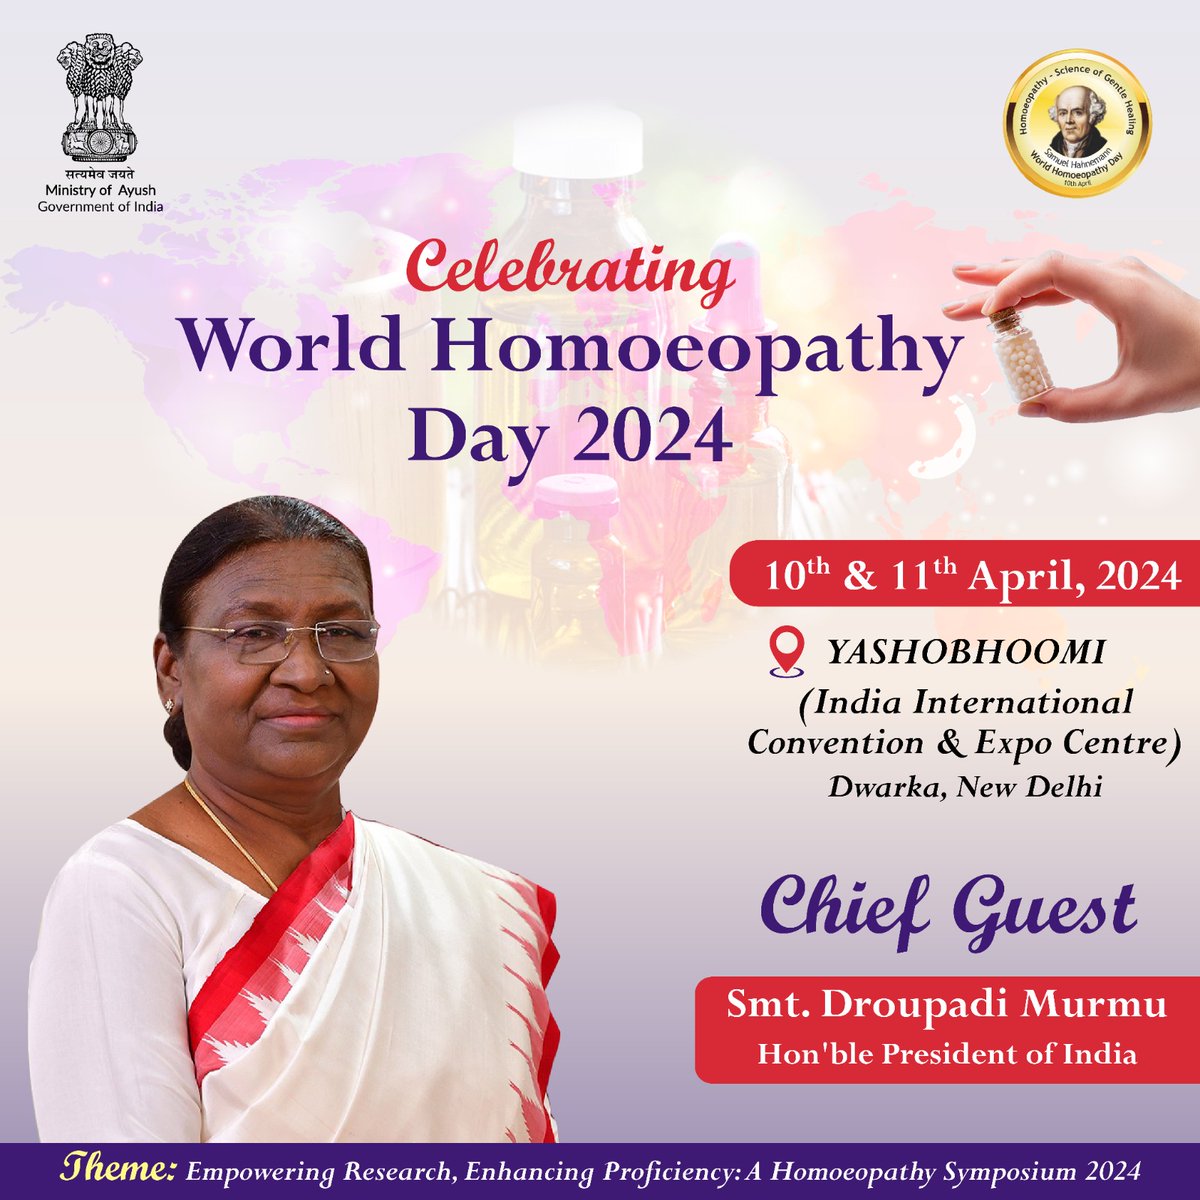 Mark your calendars & join us for the 10th-11th April for World Homoeopathy Day symposium at Yashobhoomi (India International Convention & Expo Centre) in Dwarka, New Delhi featuring discussions, engaging sessions, & a celebration of homoeopathy's impact on healthcare. @ccrhindia